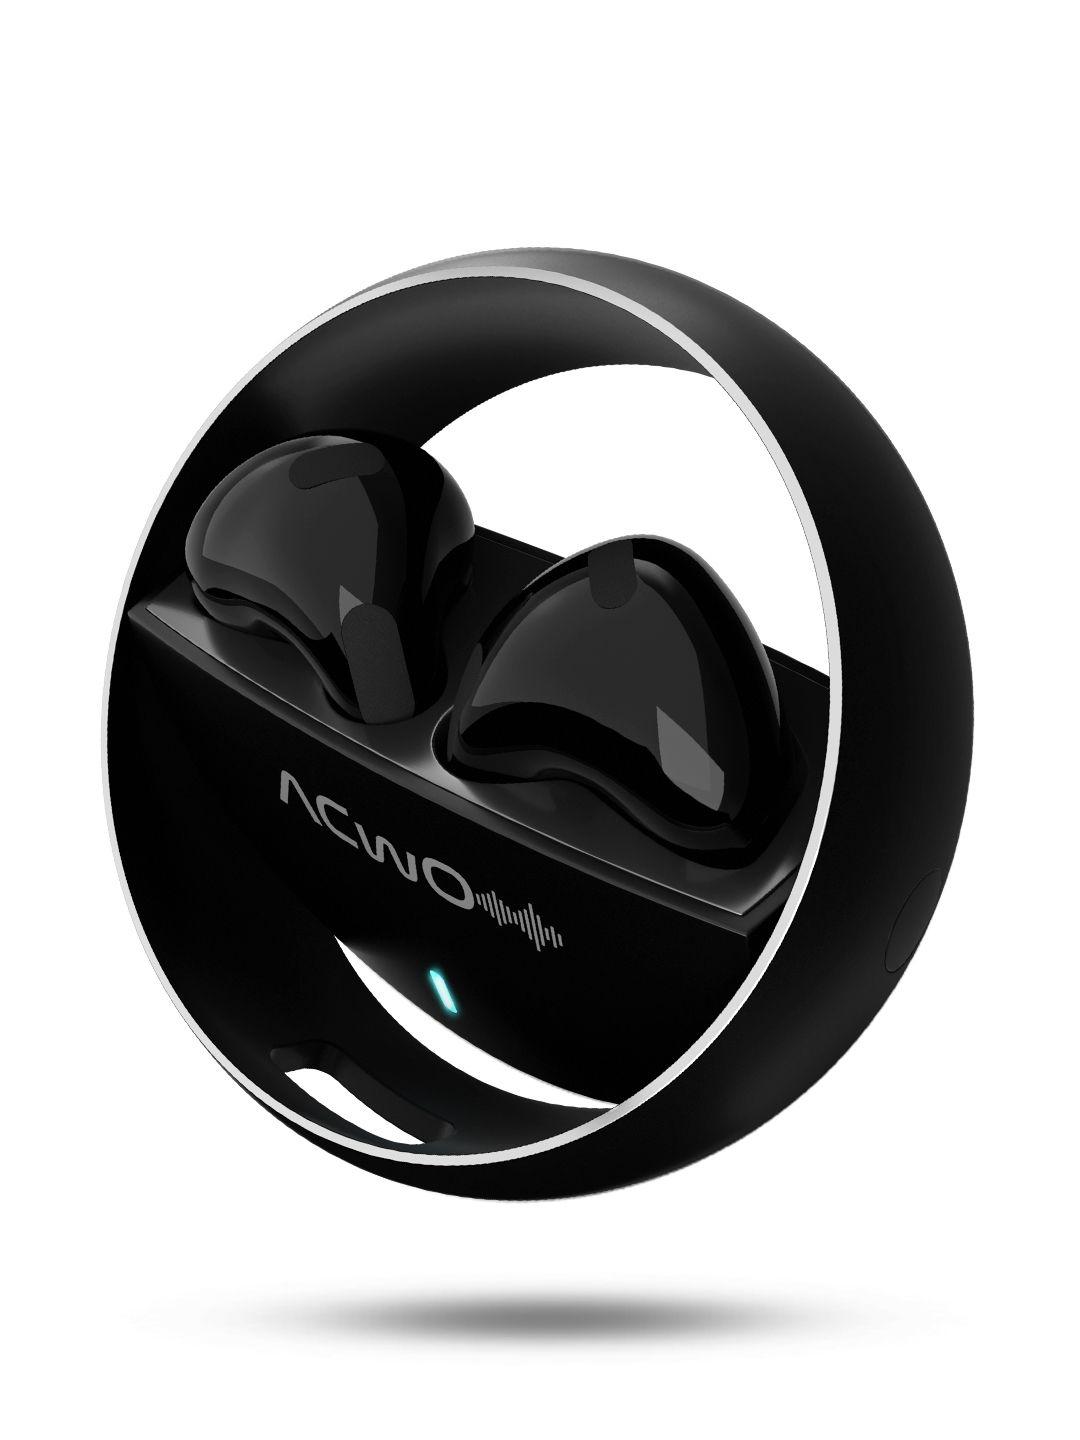 acwo dwots truly wireless earbuds with 30 hour playtime gaming